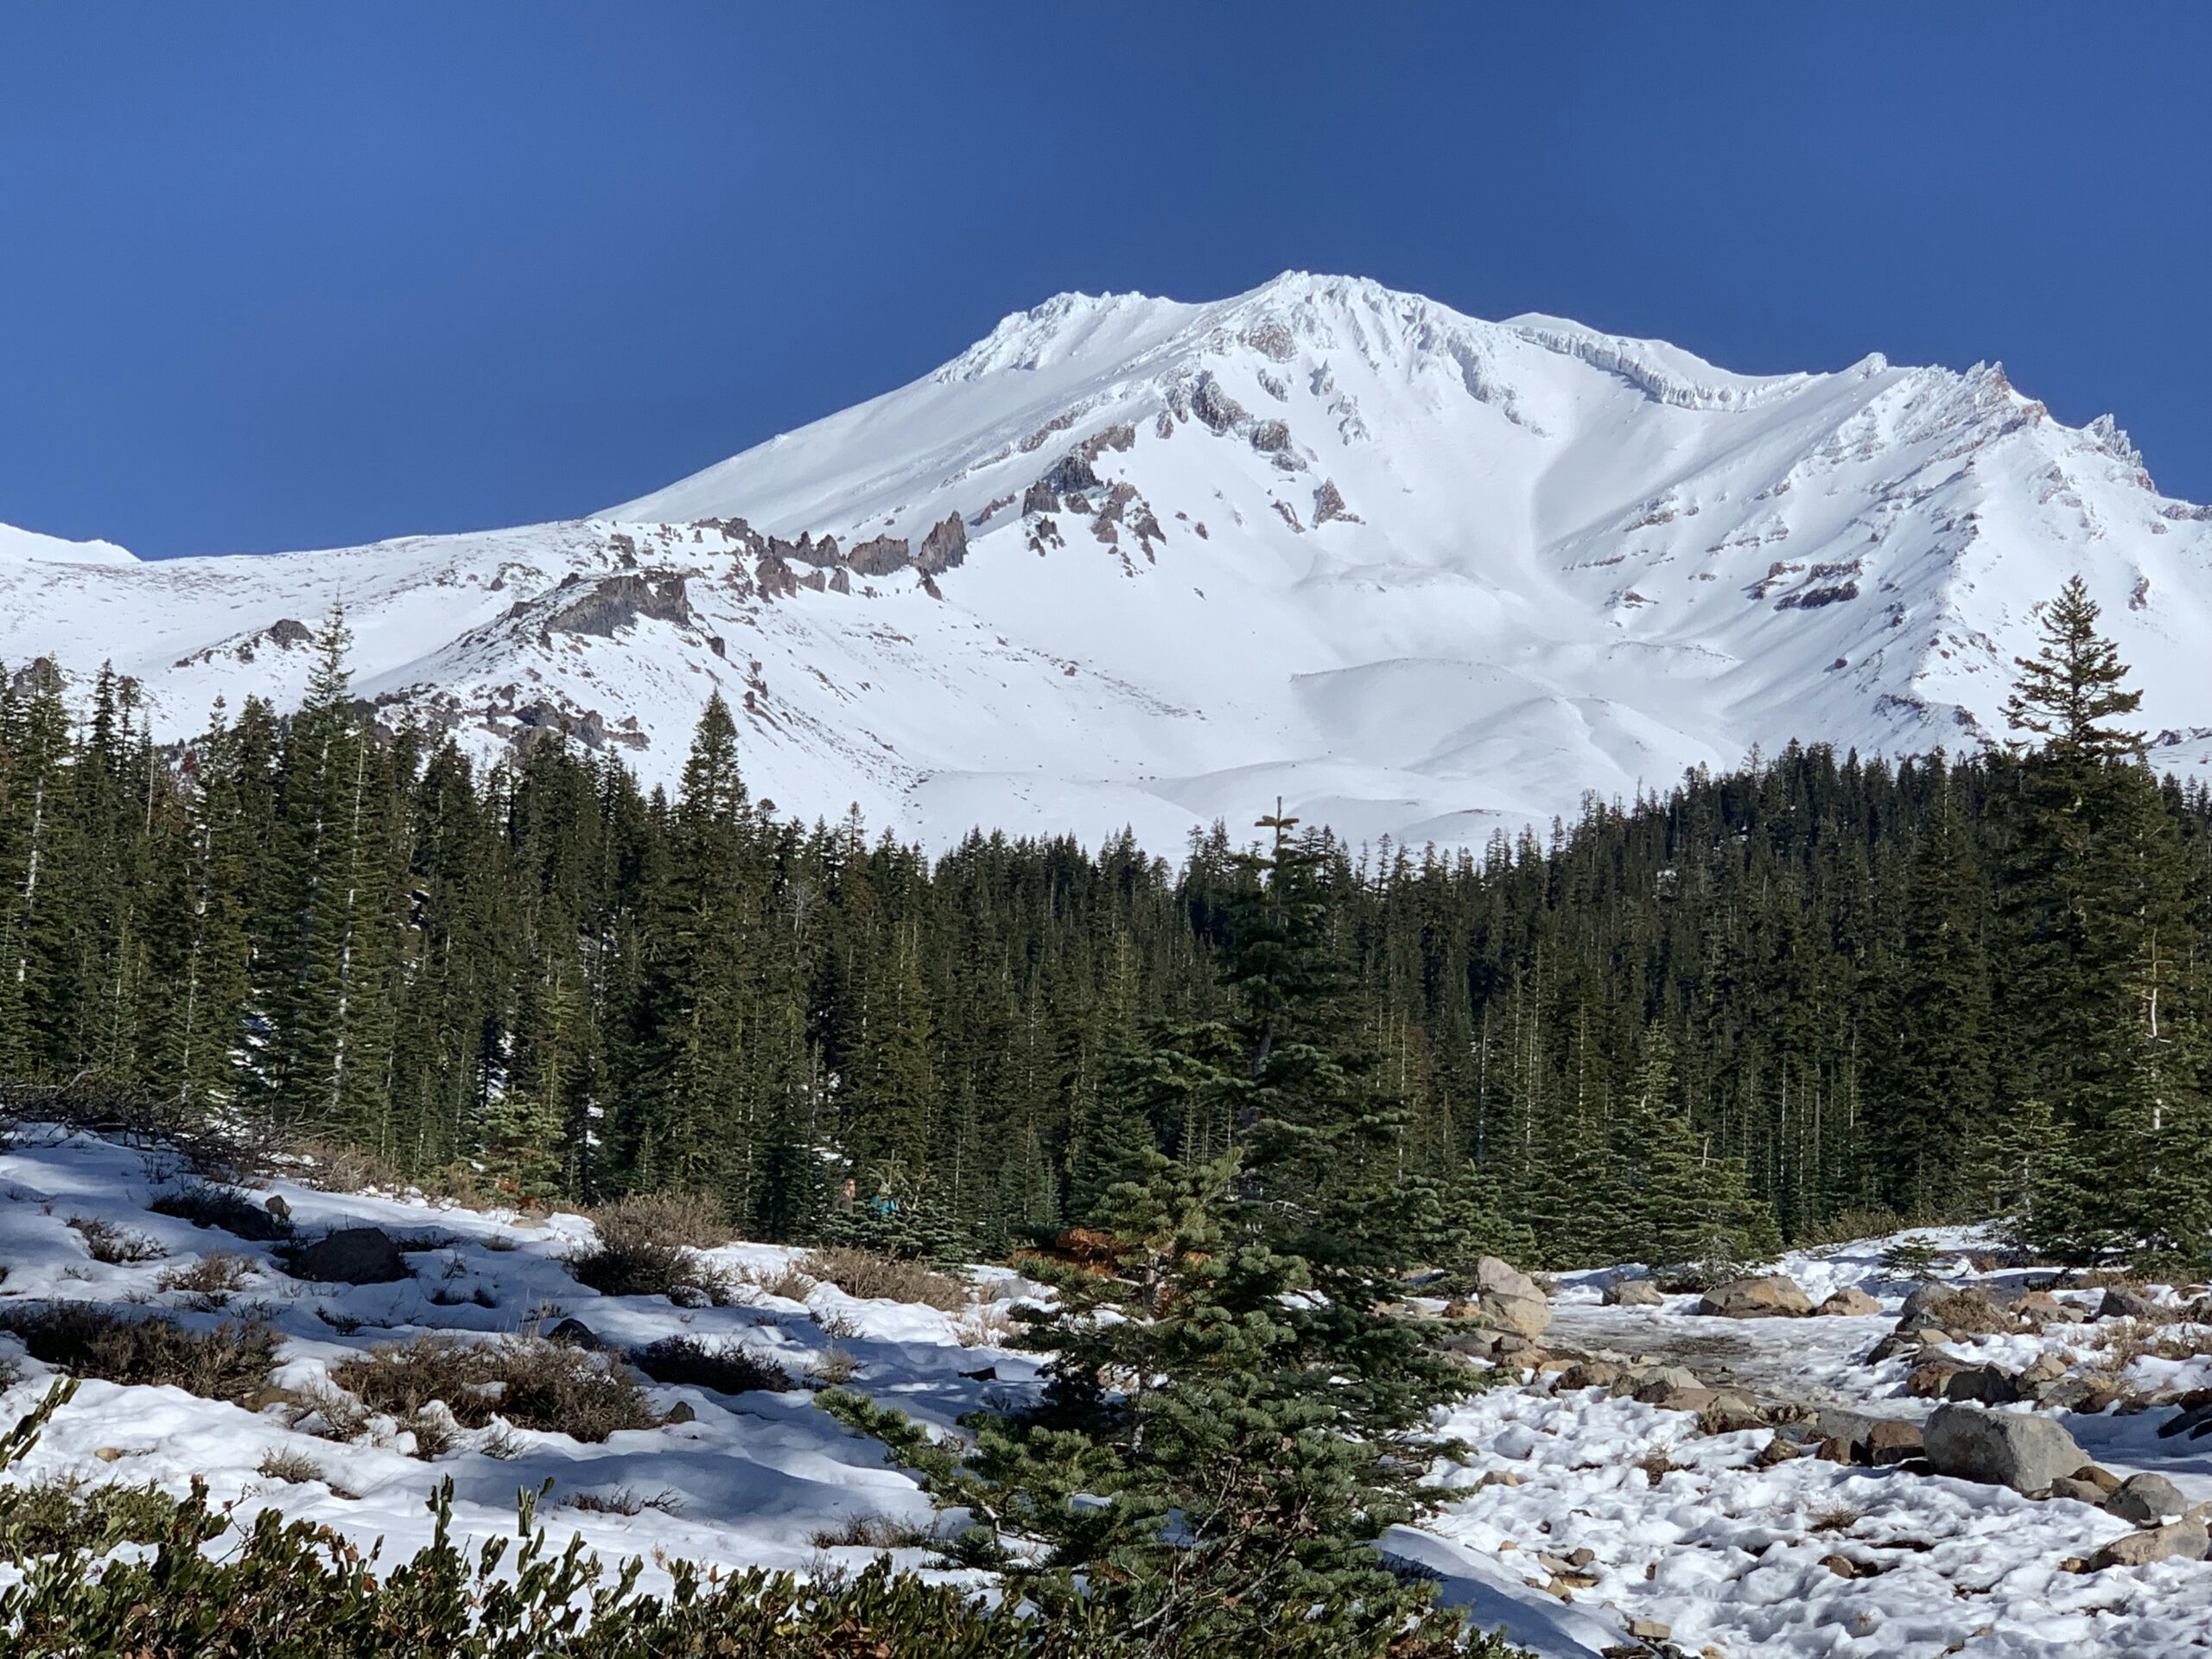 Are There Any Rescue Insurance Options Available For Climbing Mount Shasta?